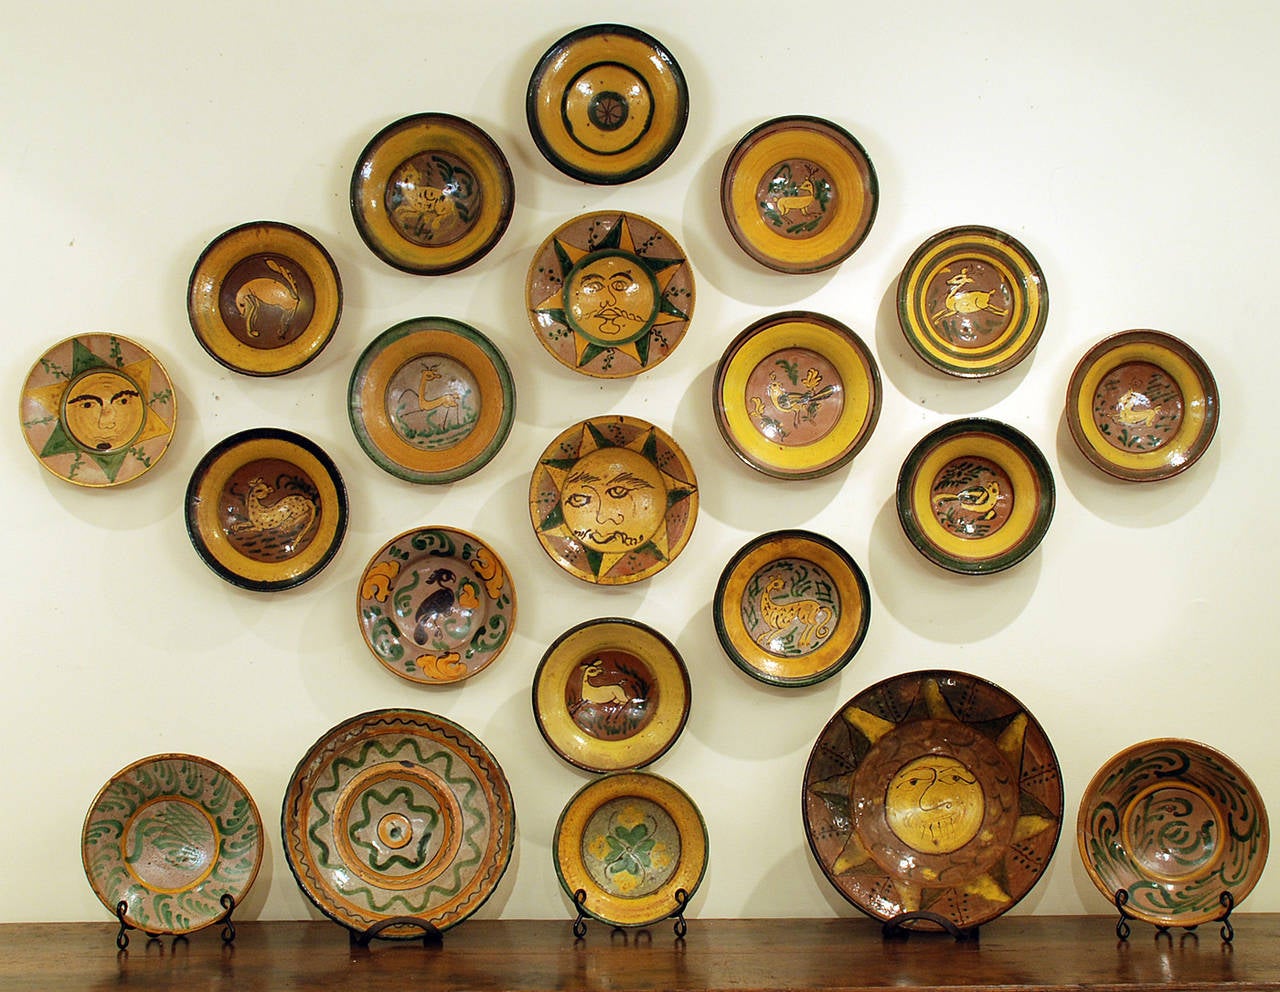 A collection of 21 hand selected late 19th and early 20th century yellow and green patterned Majolica plates, made by the Montiel Family Studio in Antigua, Guatemala. The collection includes several birds, deer, spotted leopards, jaguar and four